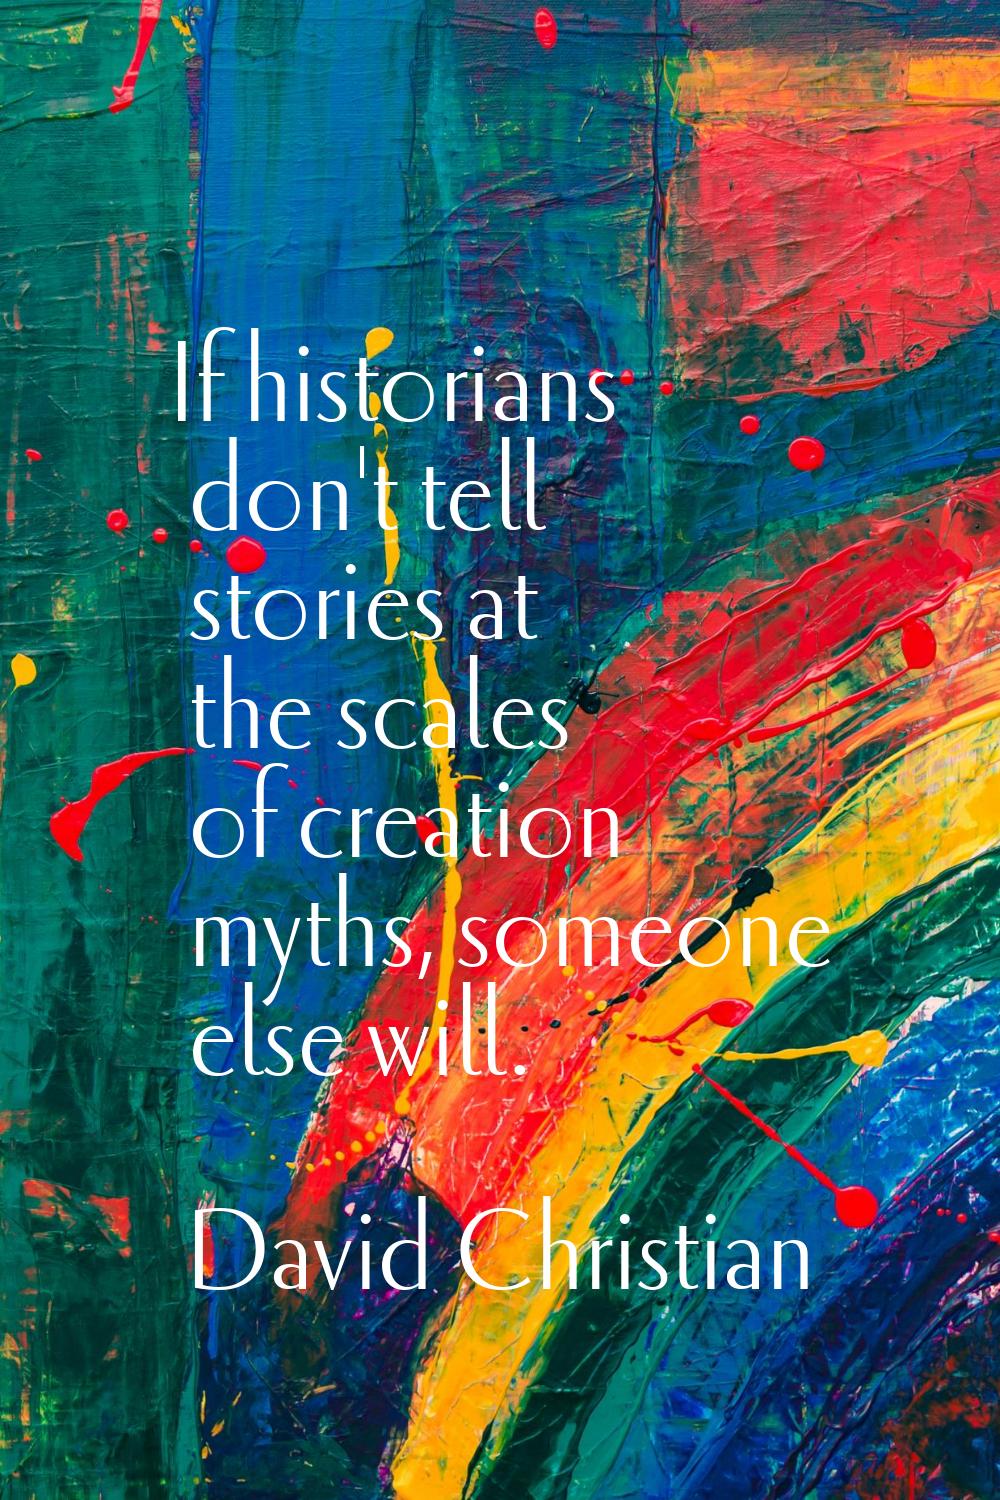 If historians don't tell stories at the scales of creation myths, someone else will.